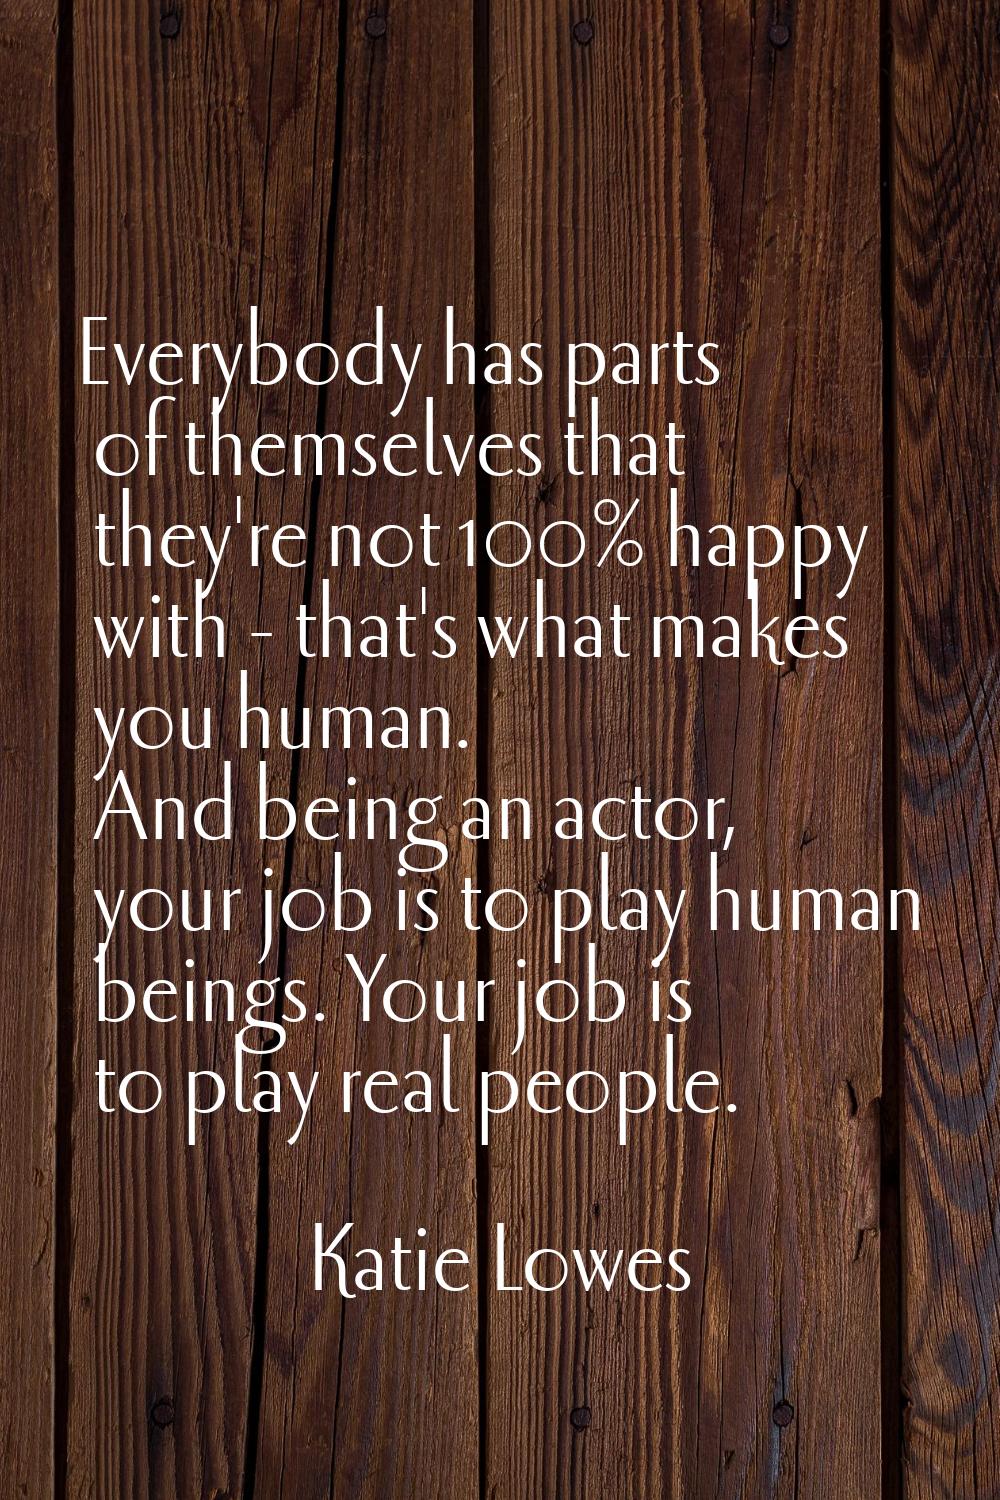 Everybody has parts of themselves that they're not 100% happy with - that's what makes you human. A